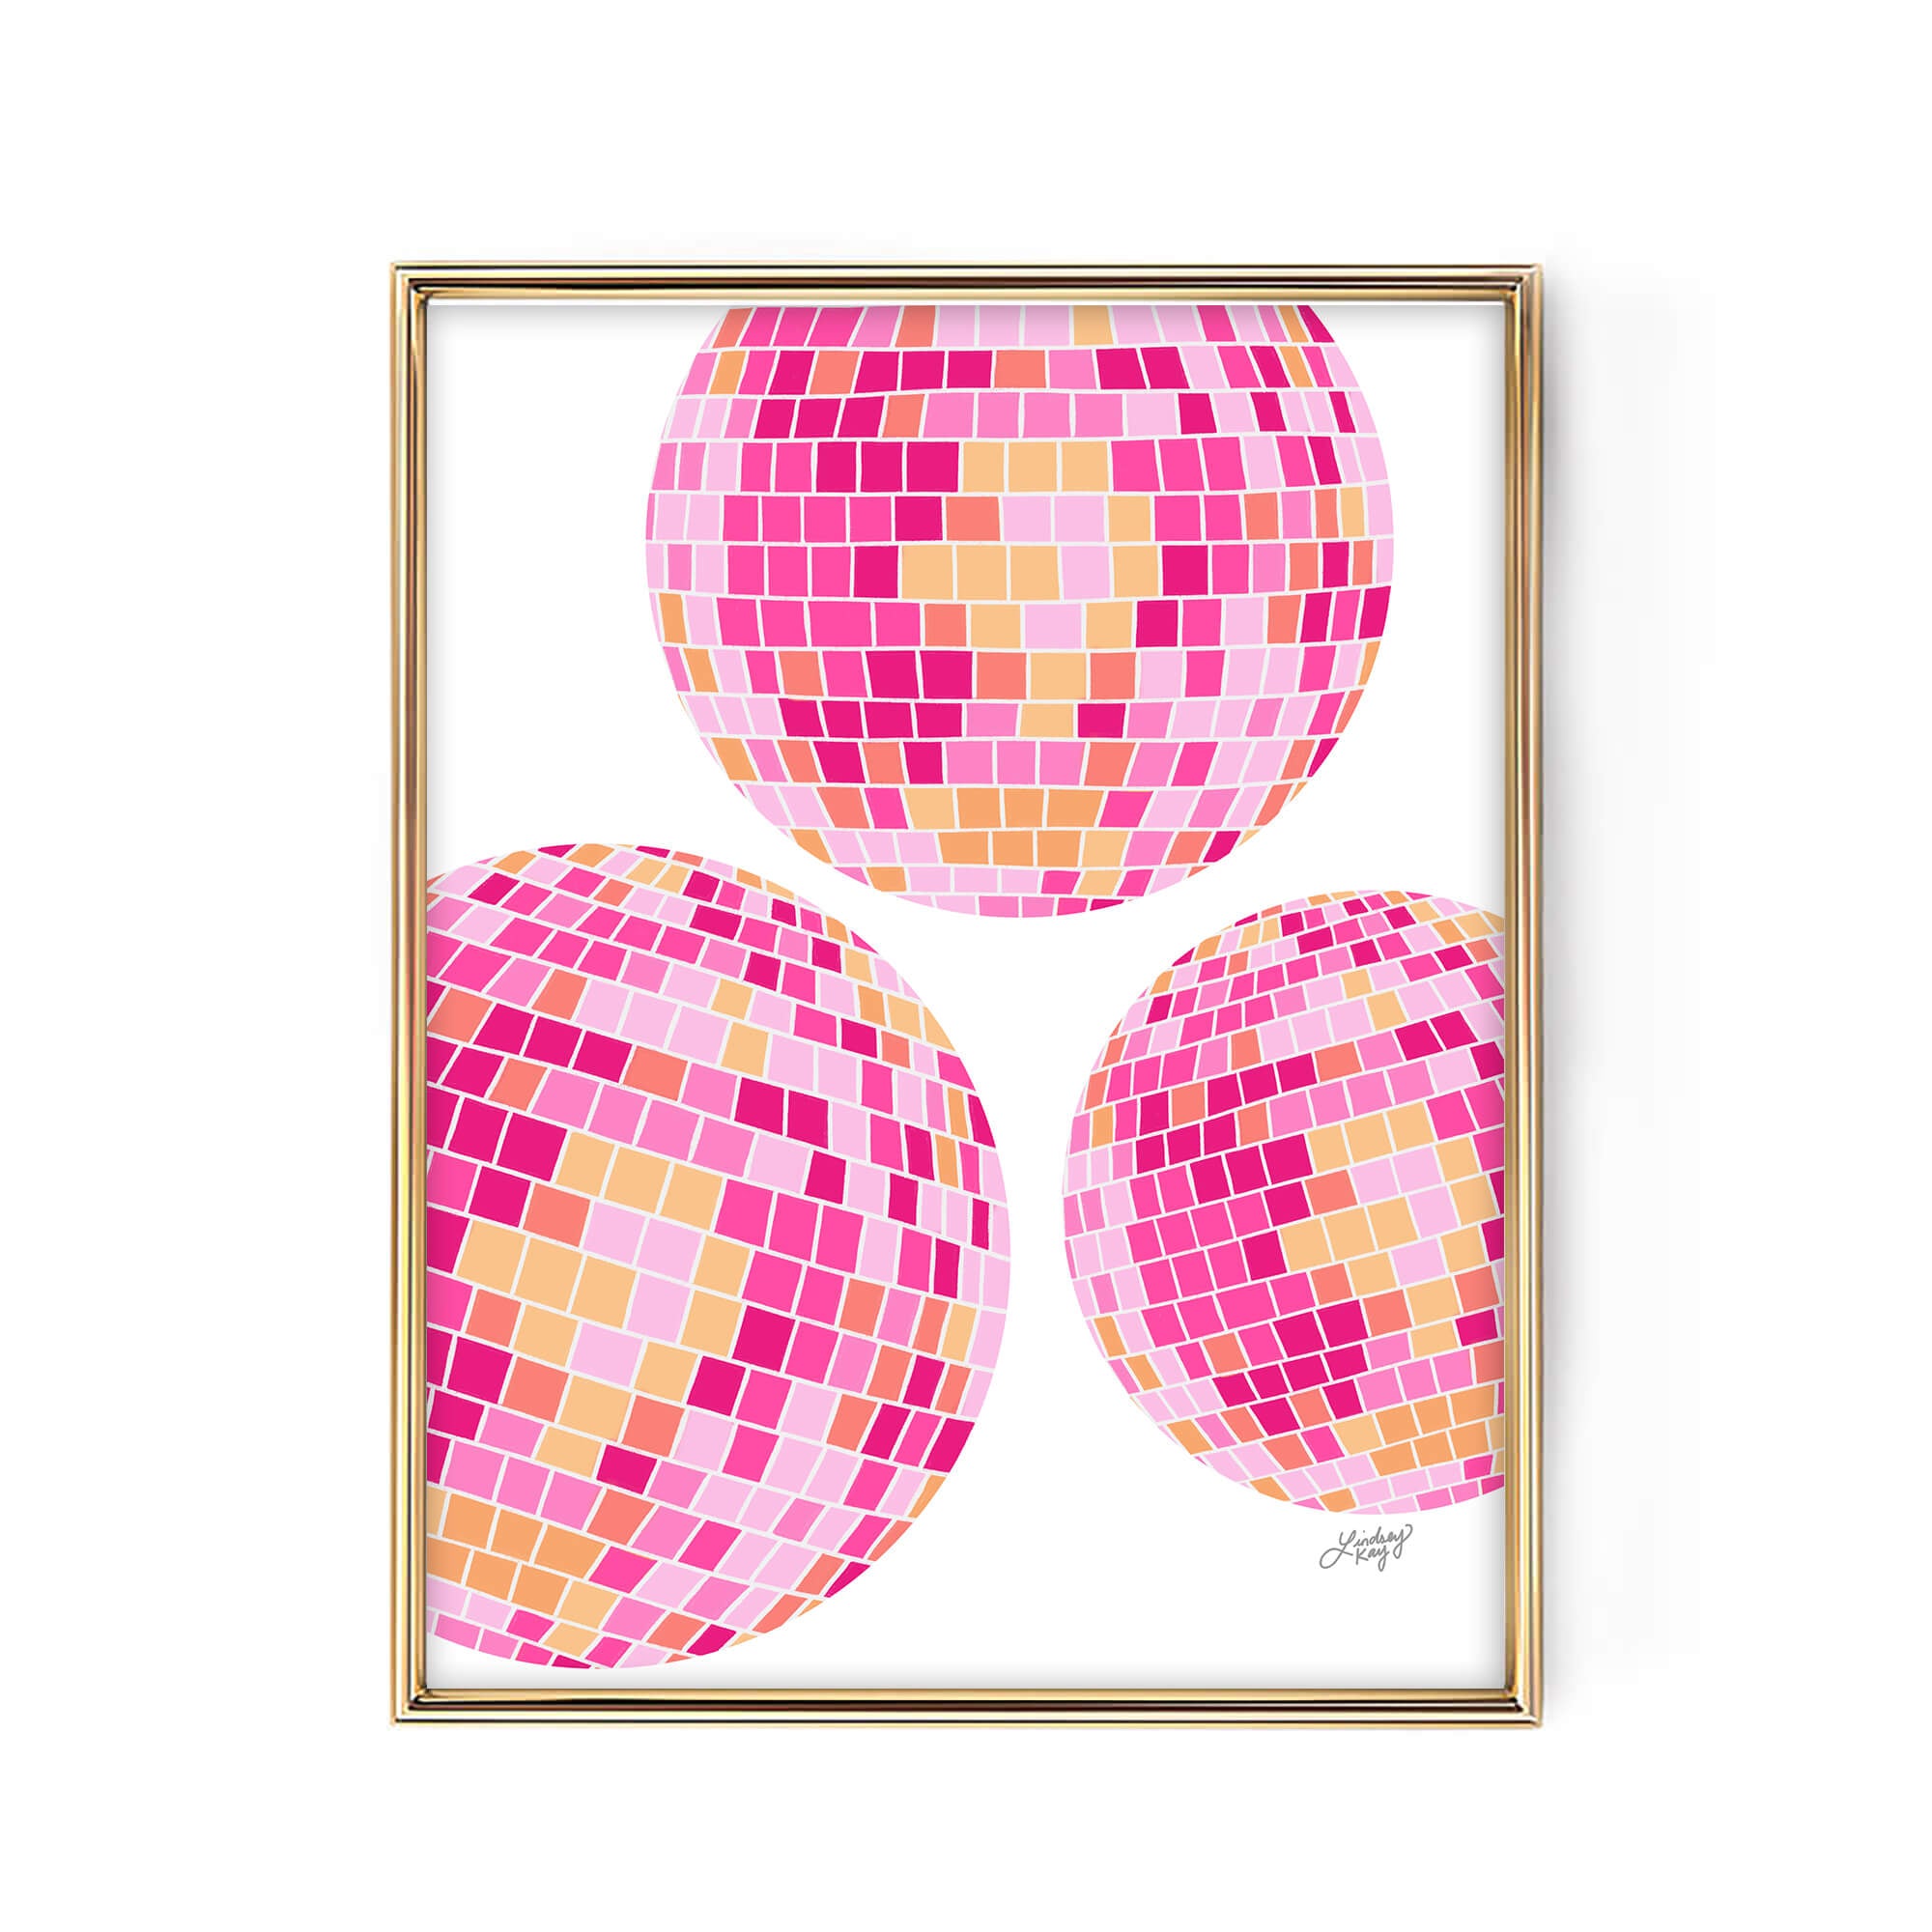 Disco Ball in Pink Art Print by Peach and Clementine Design